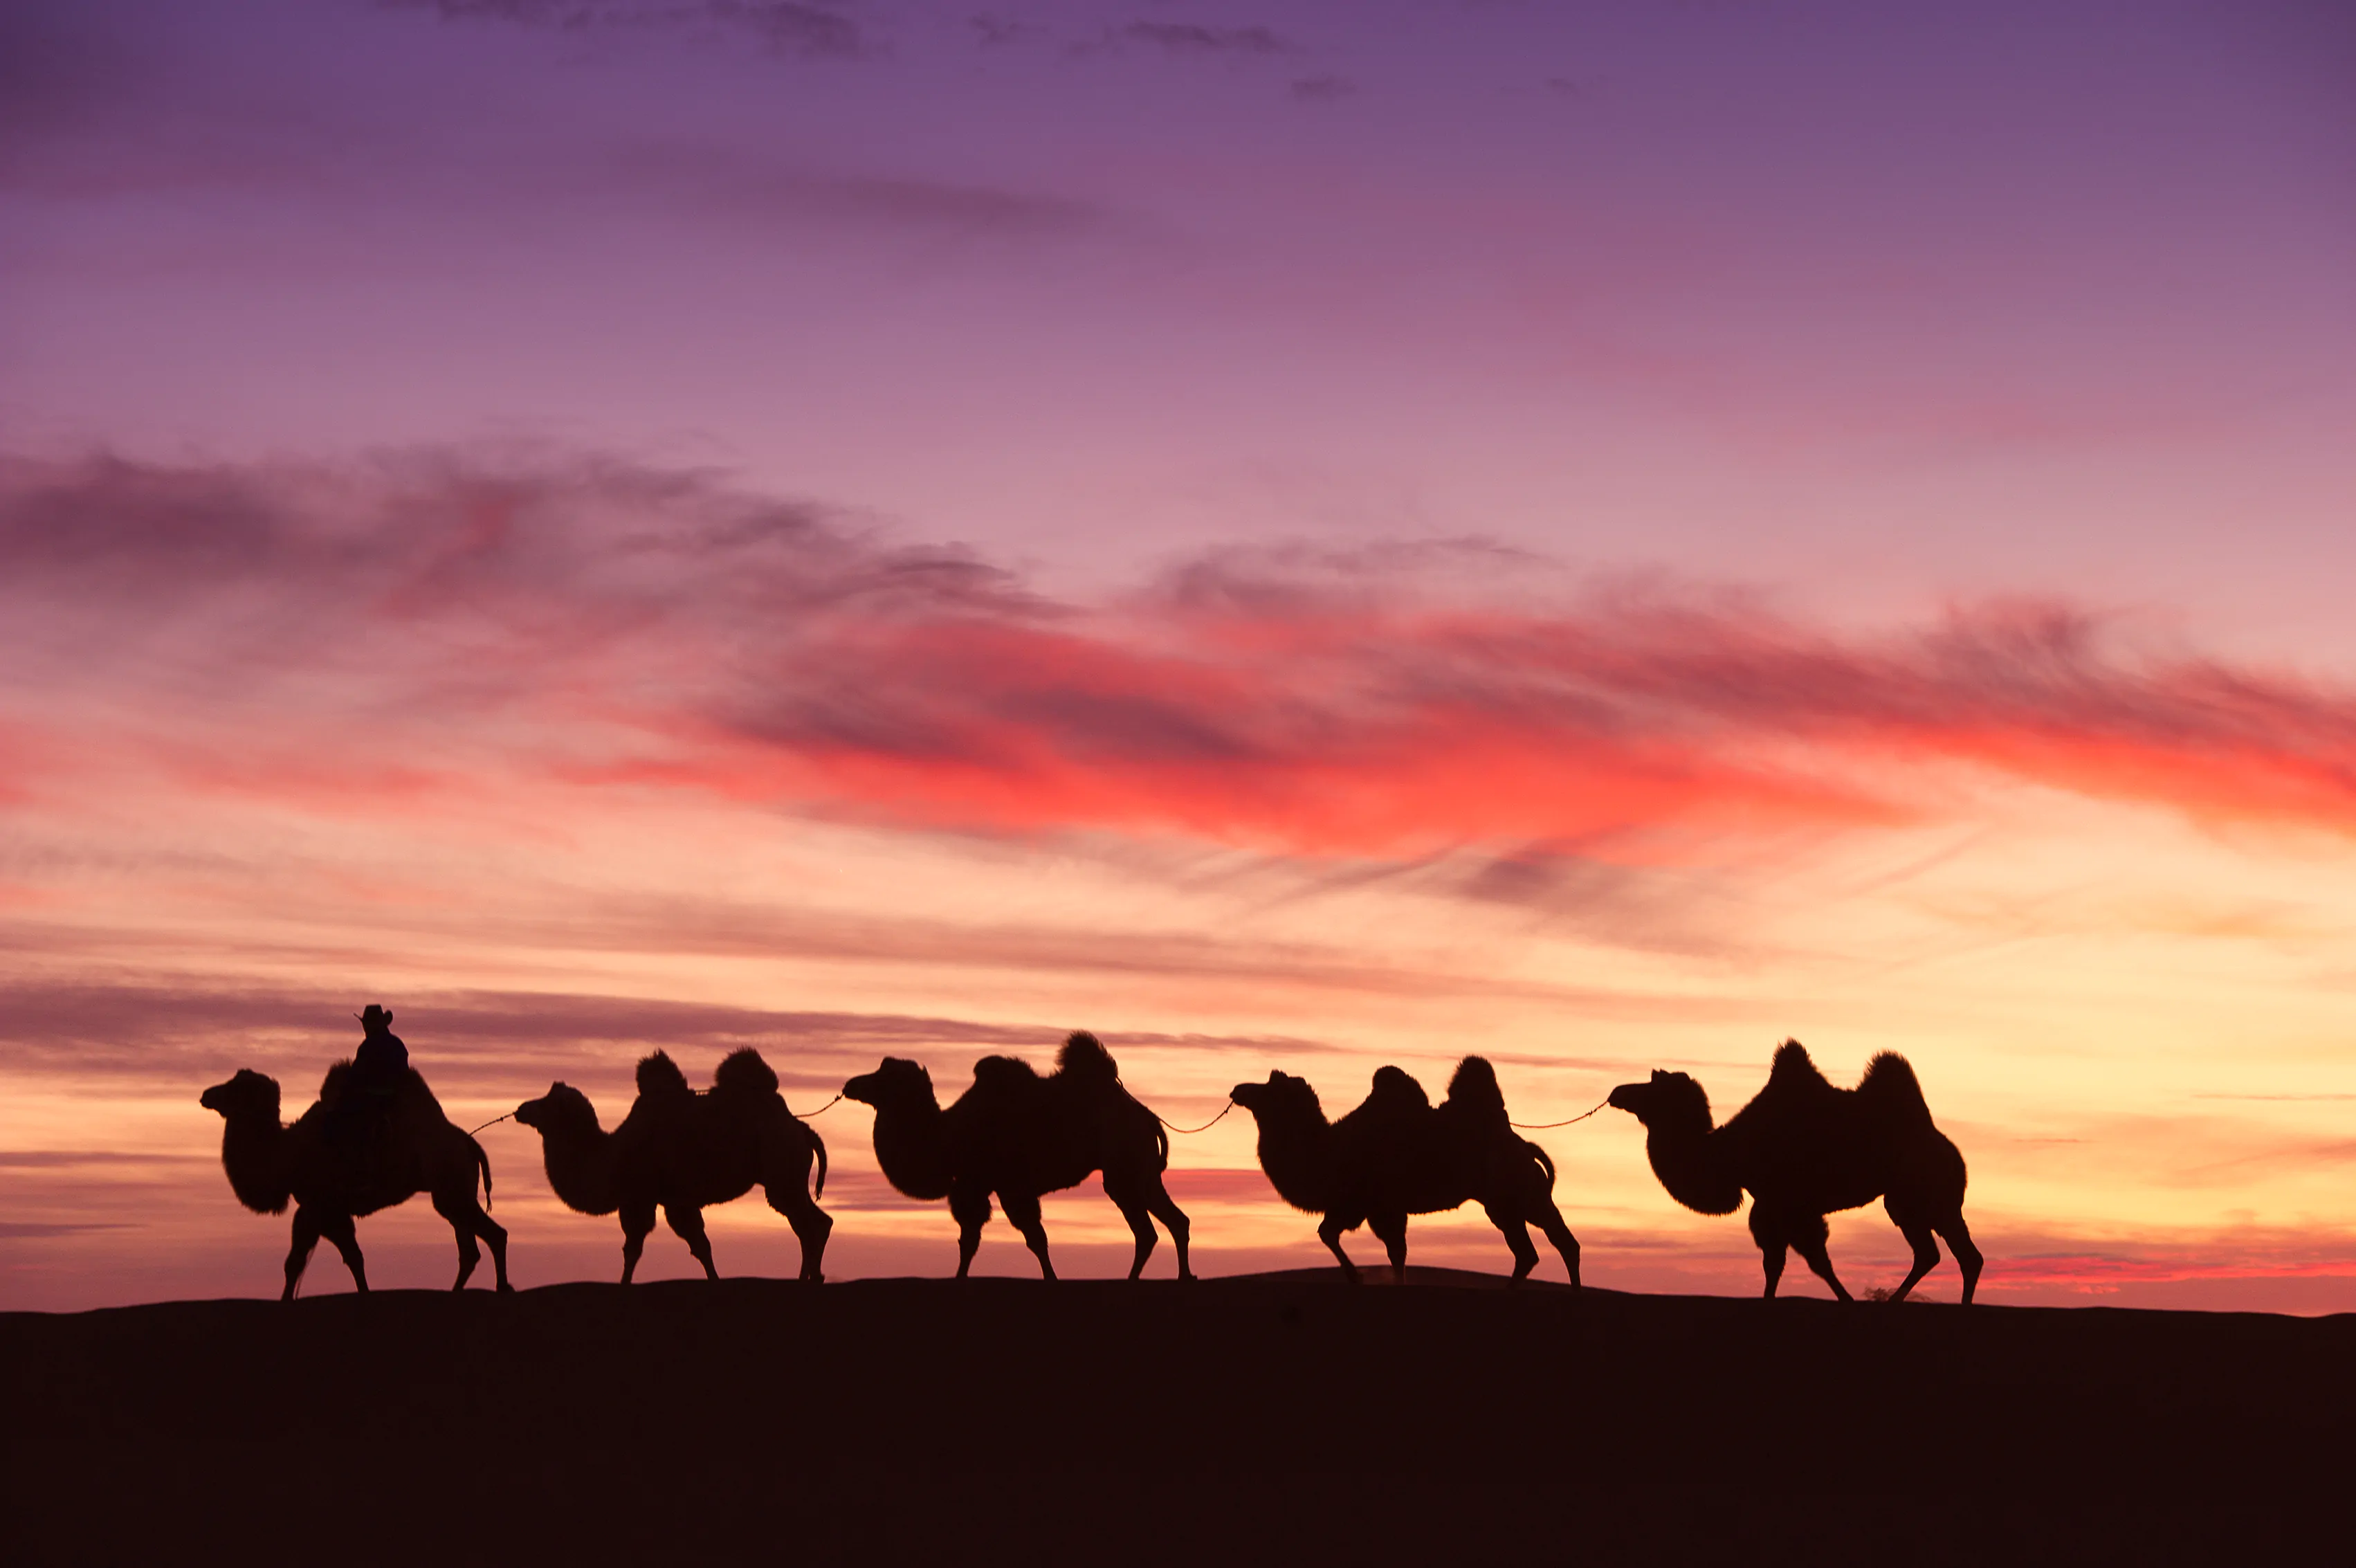 Embark on an unforgettable adventure with camel riding in Mongolia's Gobi Desert.